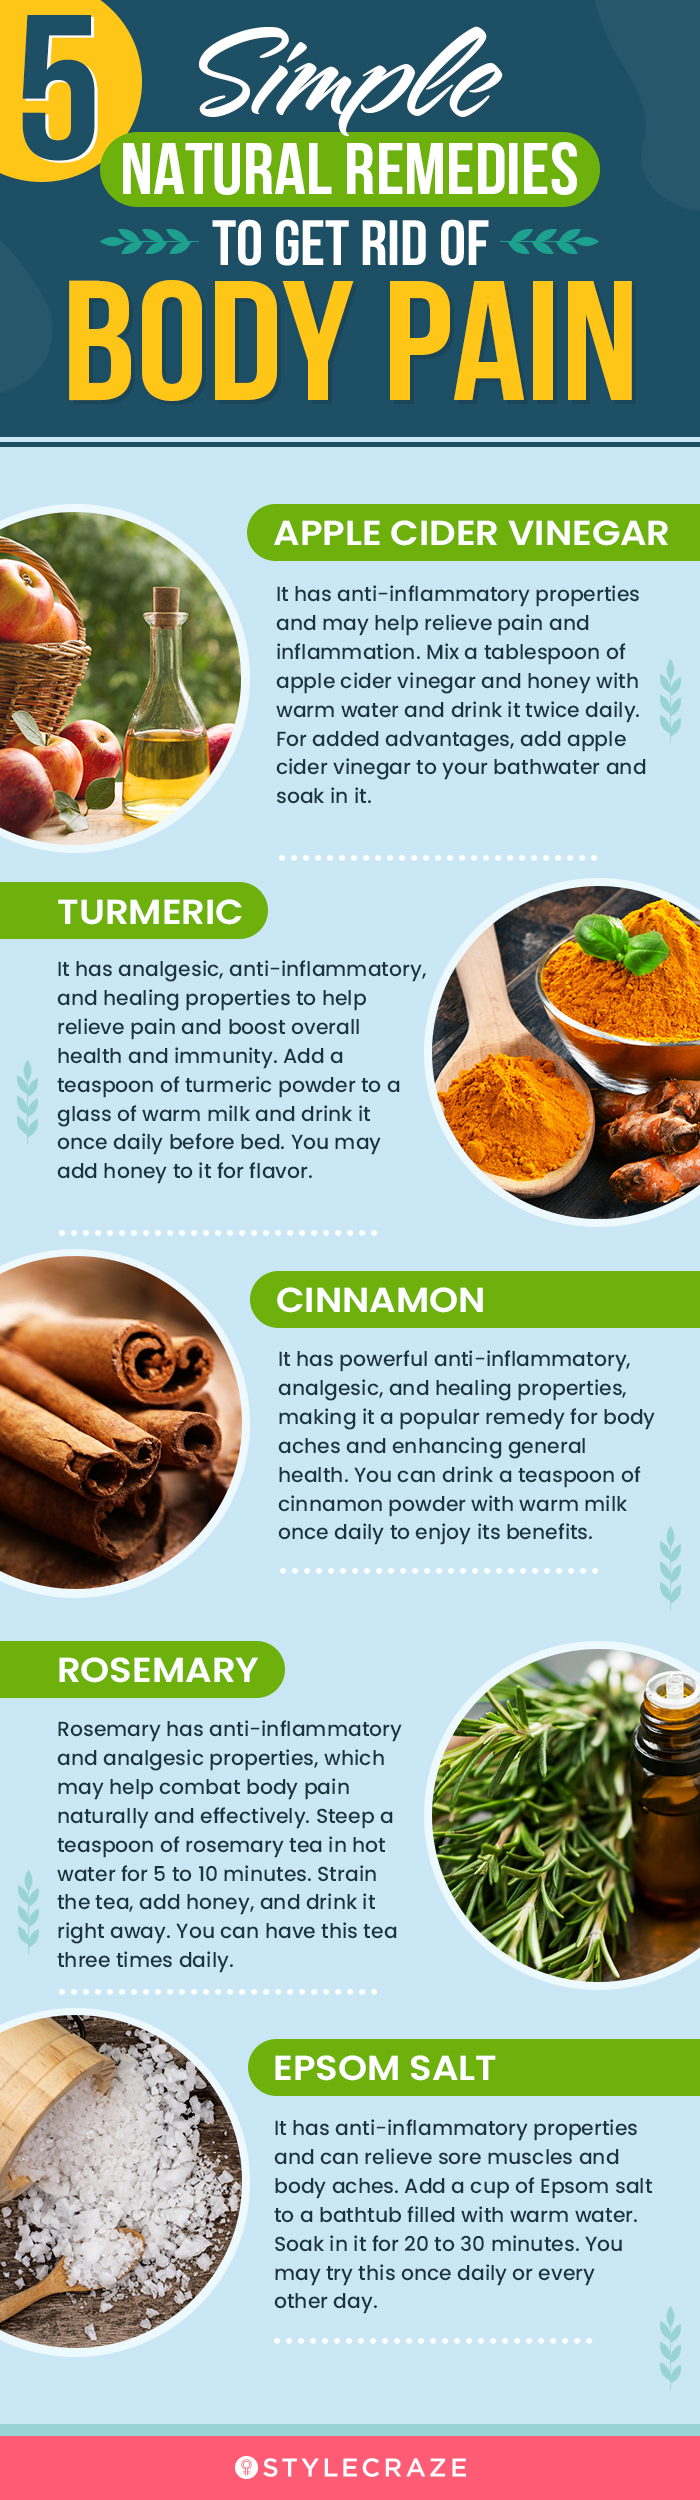 5 simple natural remedies to get rid of body pain (infographic)